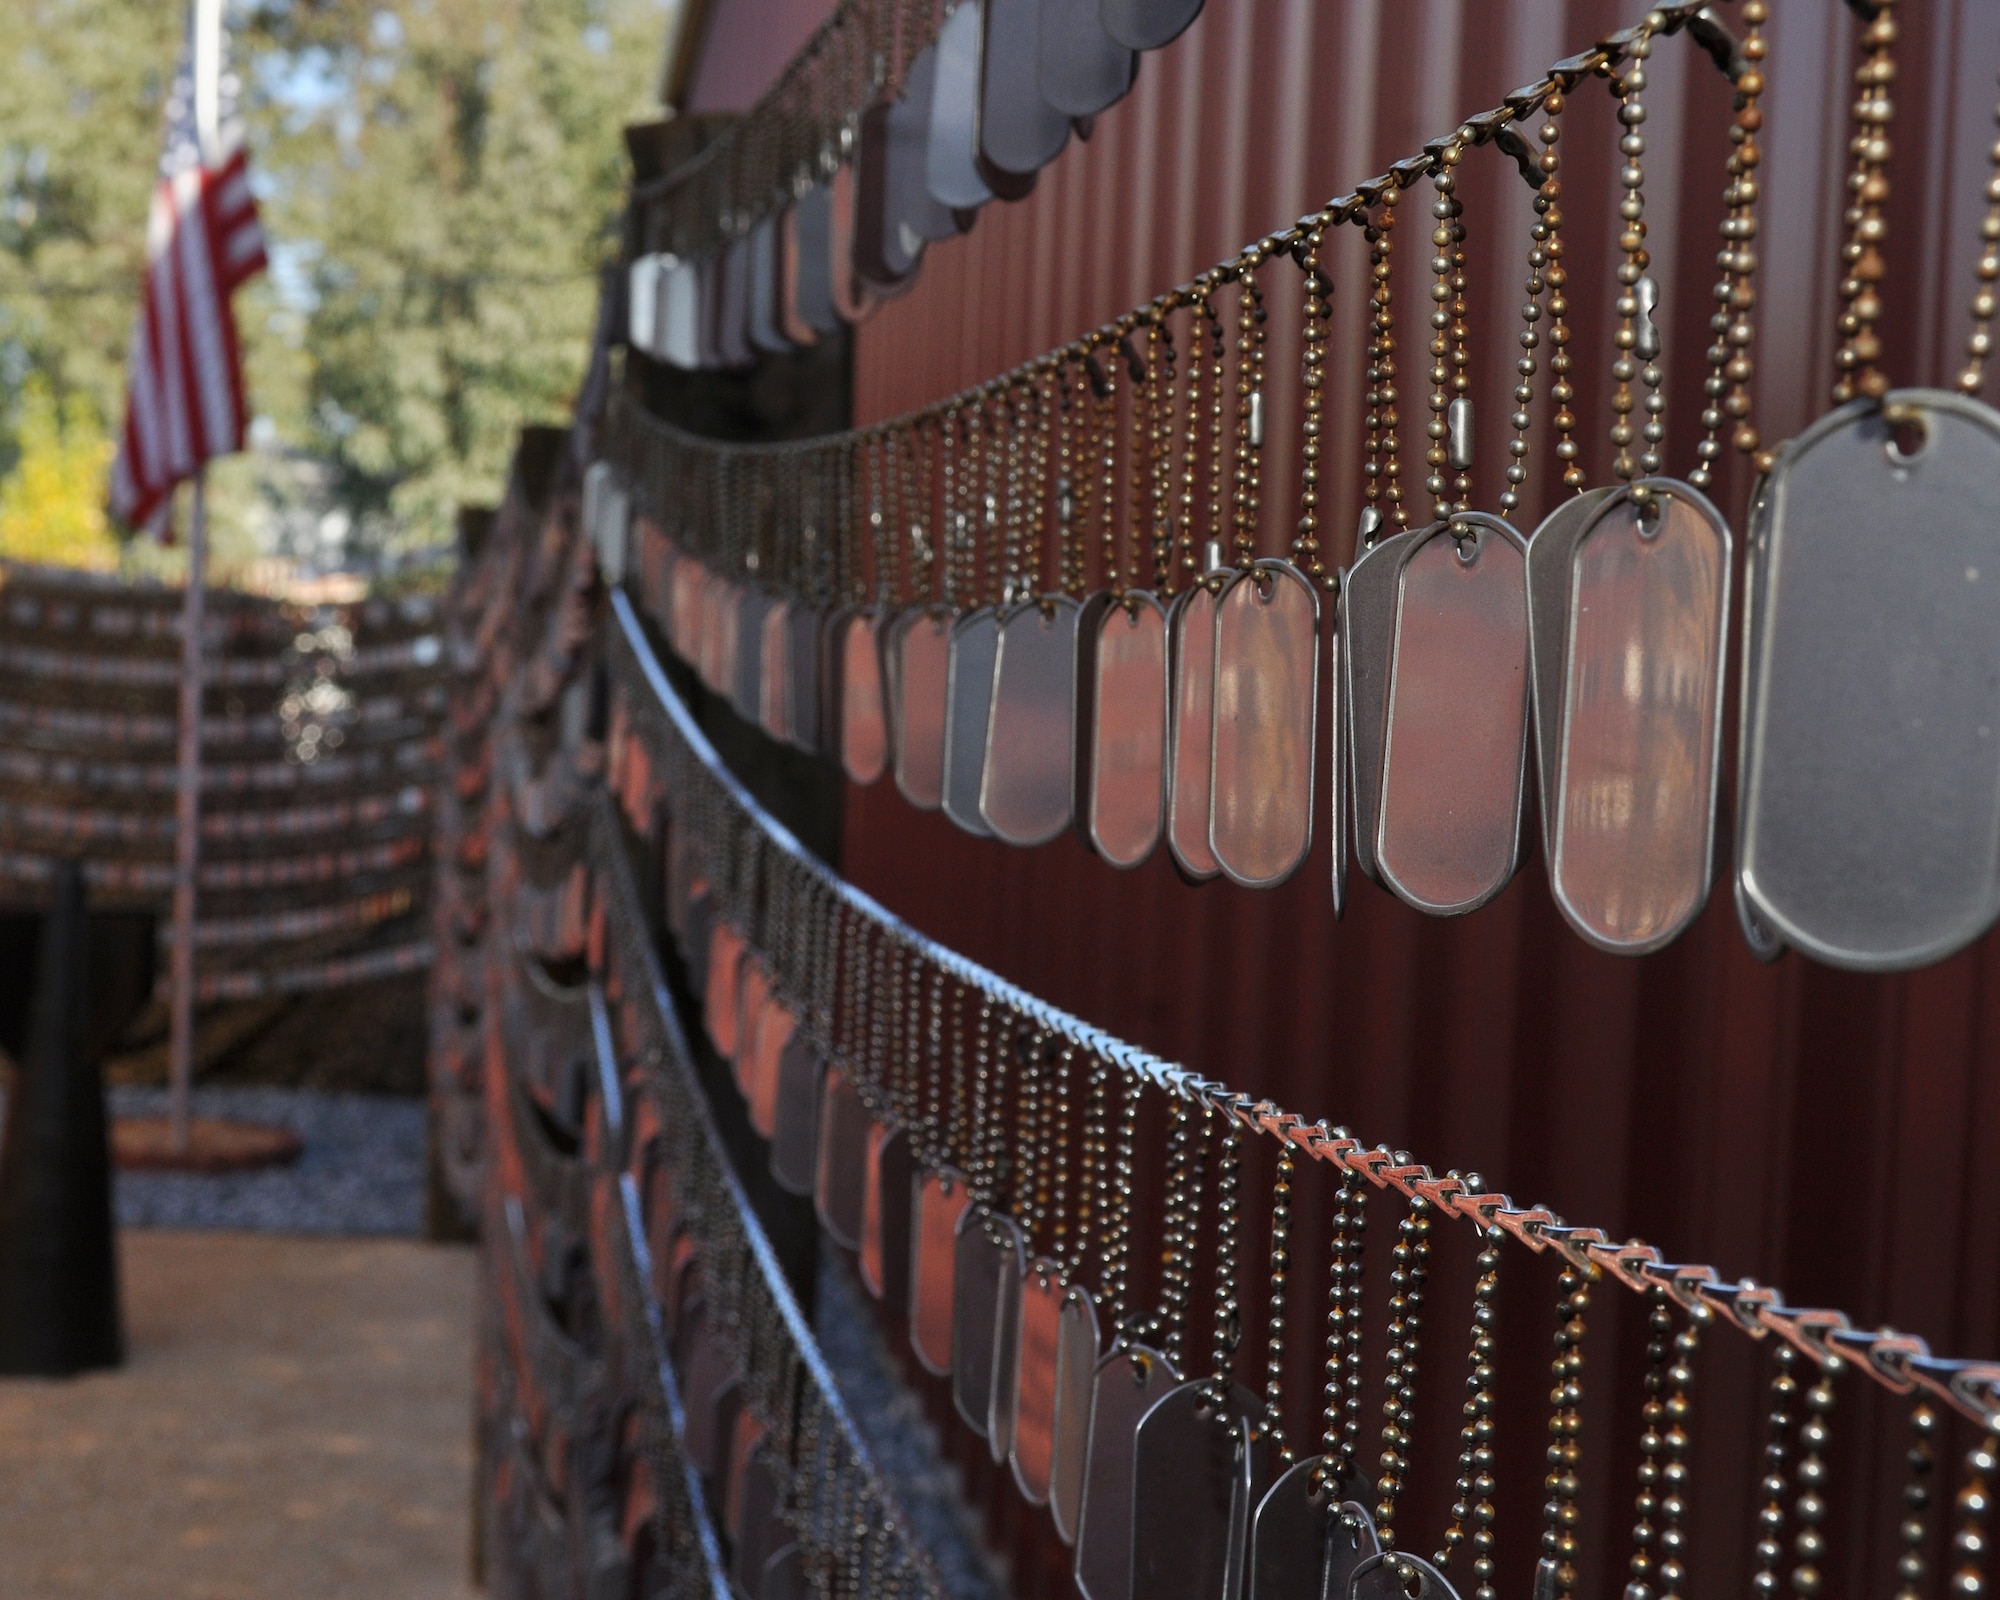 Dogs tags hang from the Iraq/Afghanistan Dog Tag Memorial at the Museum of the Forgotten Warrior outside of Beale Air Force Base, Calif., Nov. 10, 2011.  The memorial was built to honor all of the men and women who have been killed during the Iraq and Afghanistan Wars as of October 30, 2011, containing 6296 individual dog tags.  (U.S. Air Force photo by Staff Sgt. Jonathan Fowler)